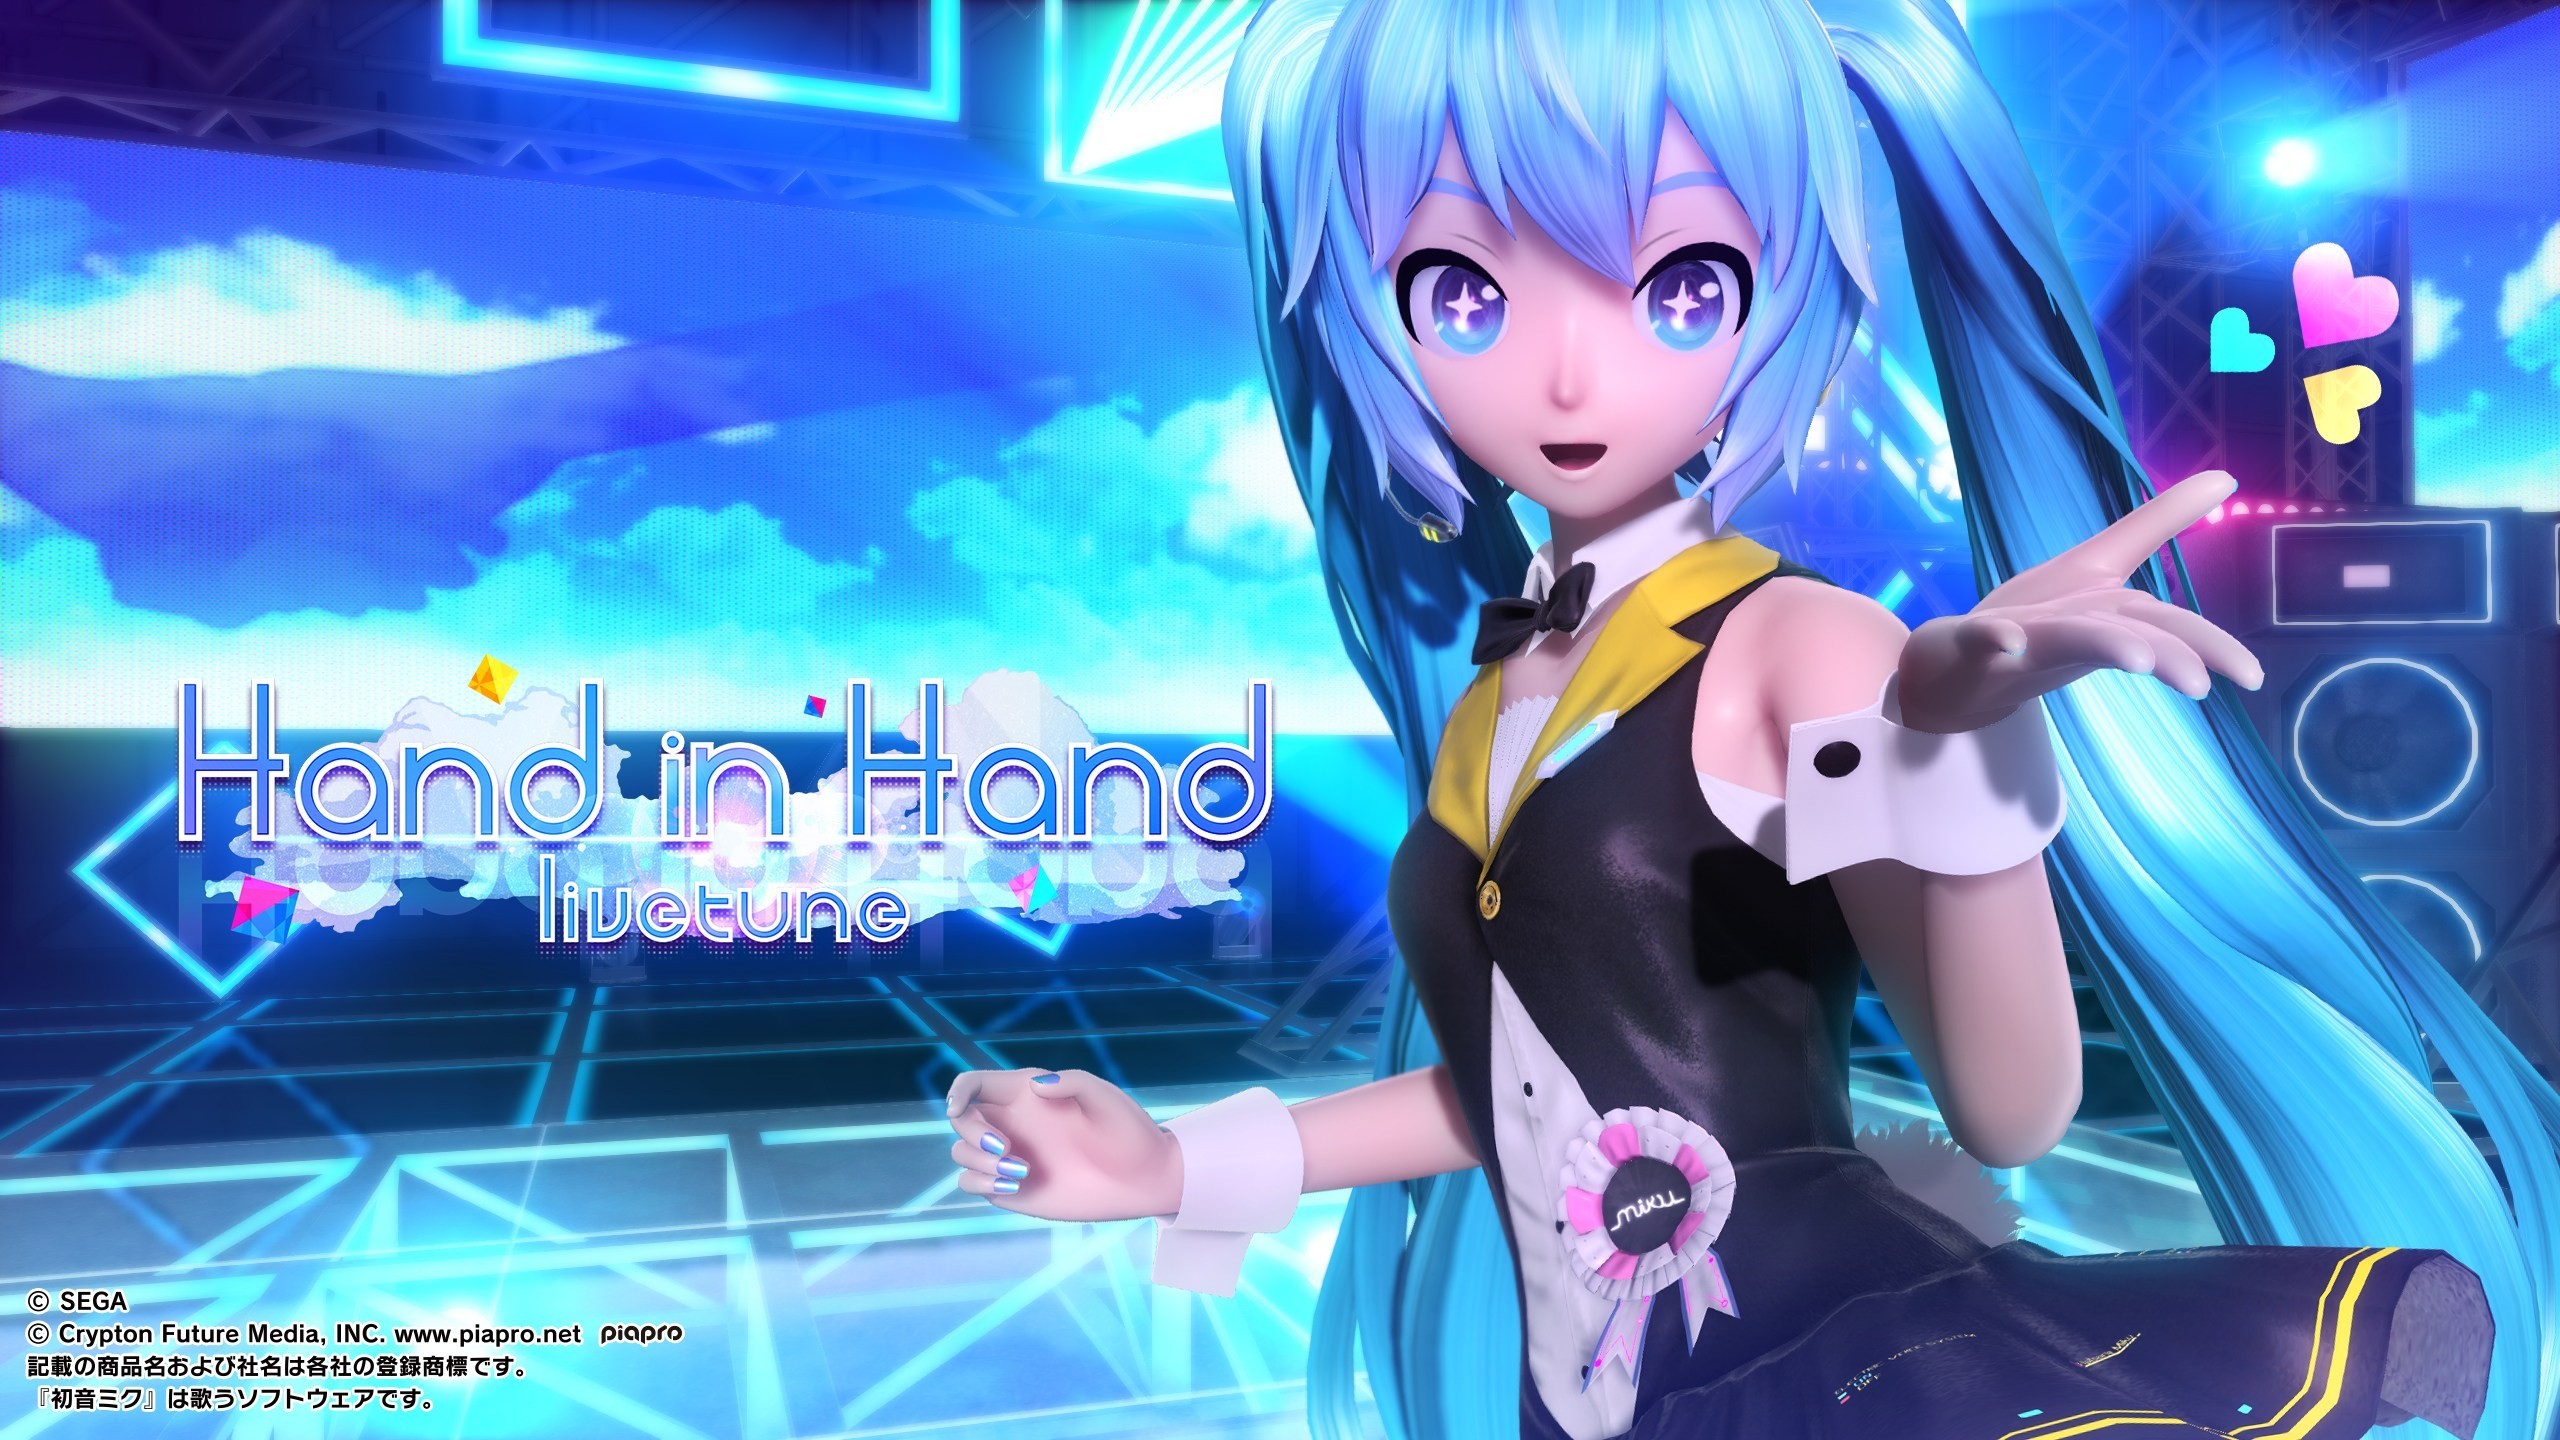 2560x1440 Hatsune Miku: Project DIVA Arcade Future Tone Adds “LOL -Lots of Laugh-”  And “Hand in Hand” to Its Song Lineup